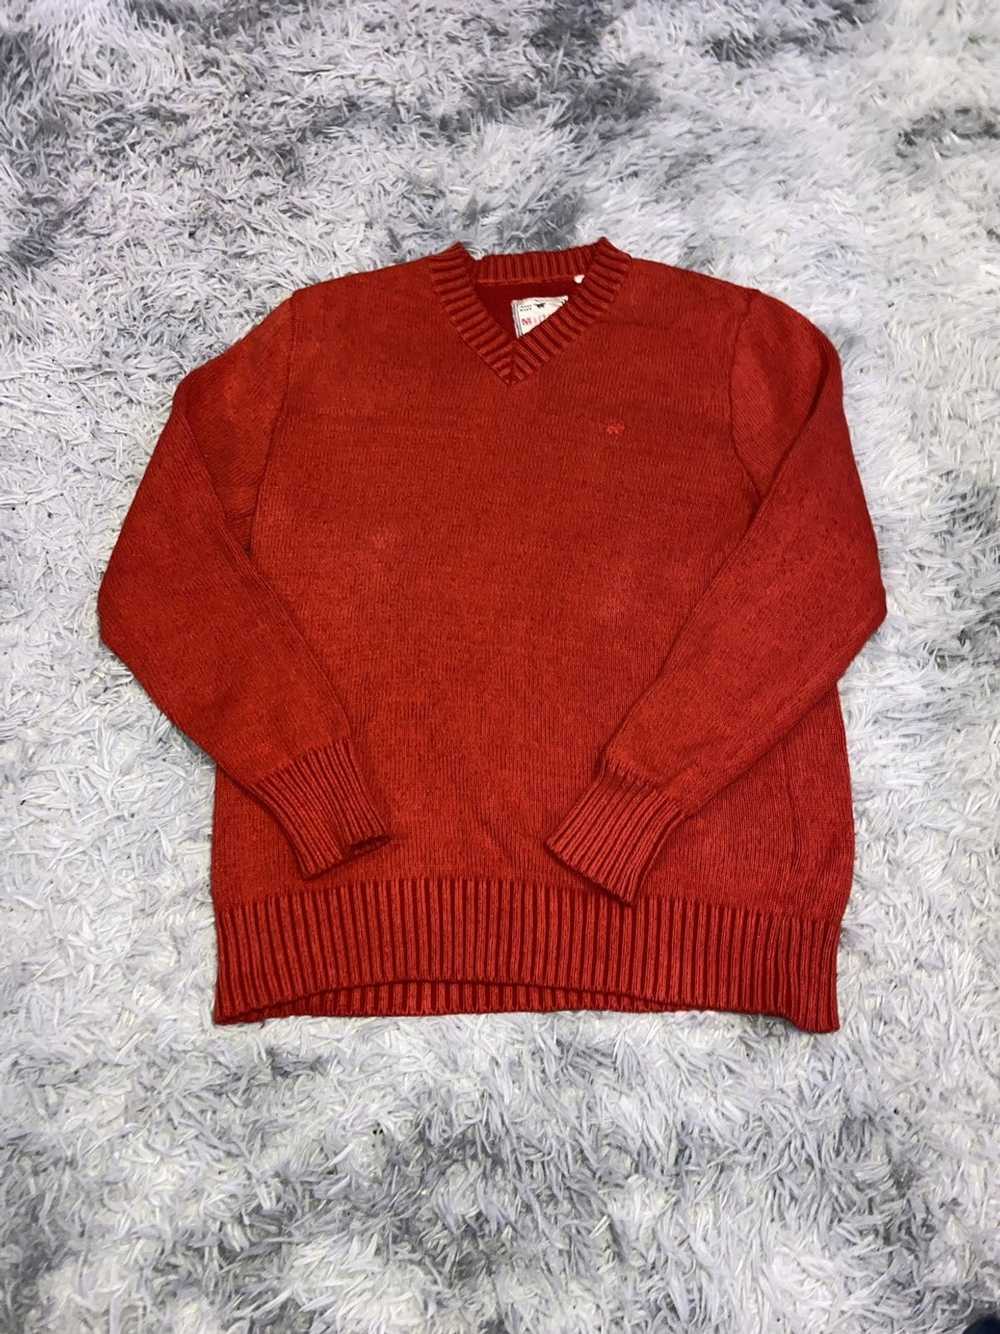 Mustang × Vintage RARE RED MUSTANG SWEATER SIZE L… - image 1